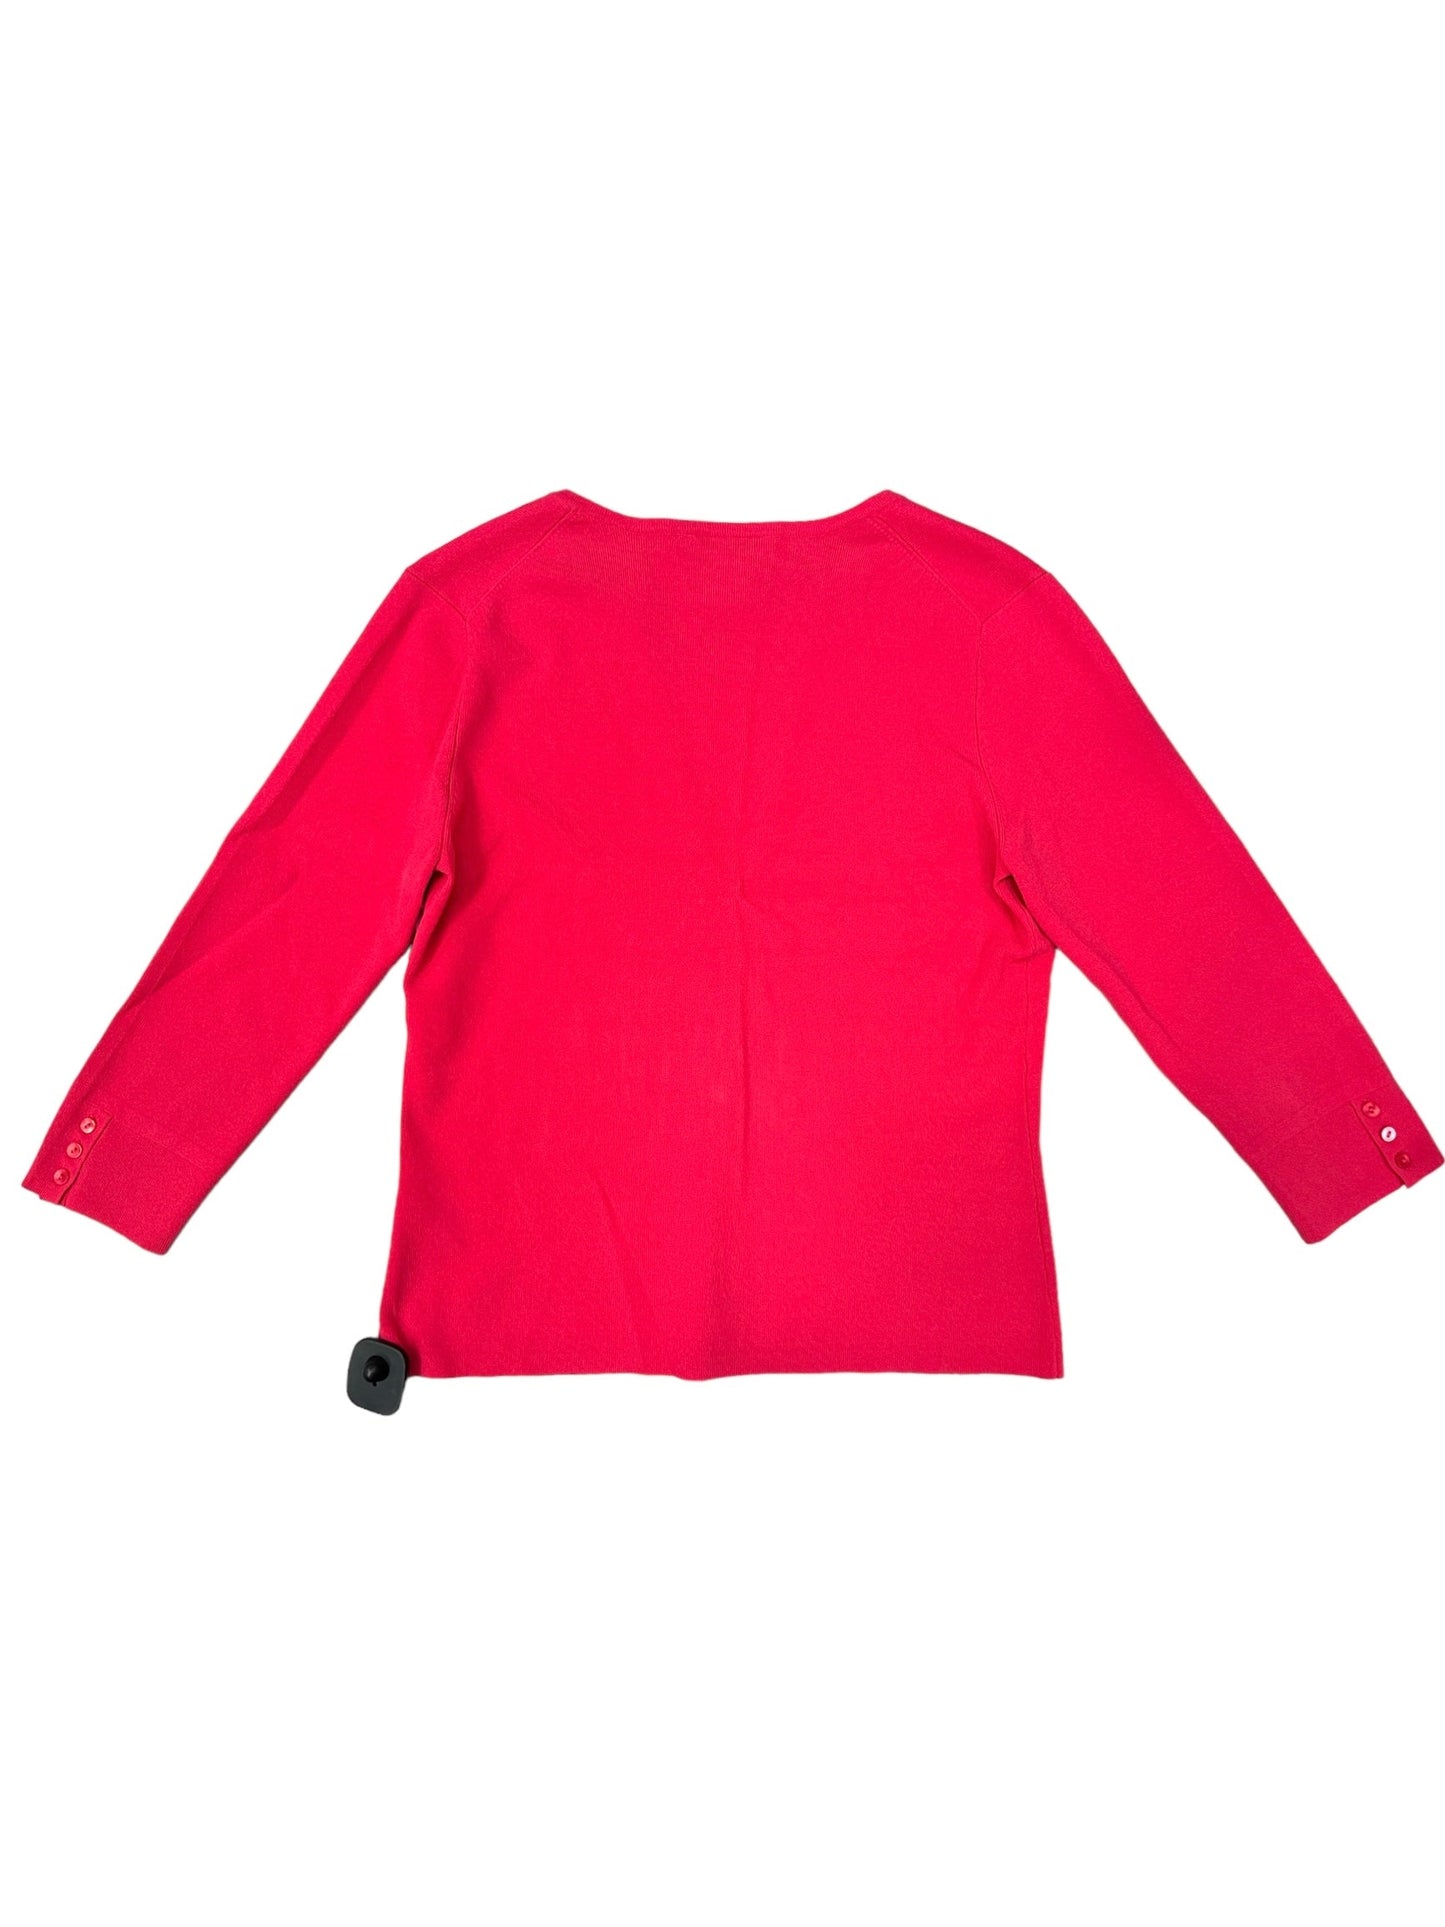 Pink Top Long Sleeve Talbots, Size M